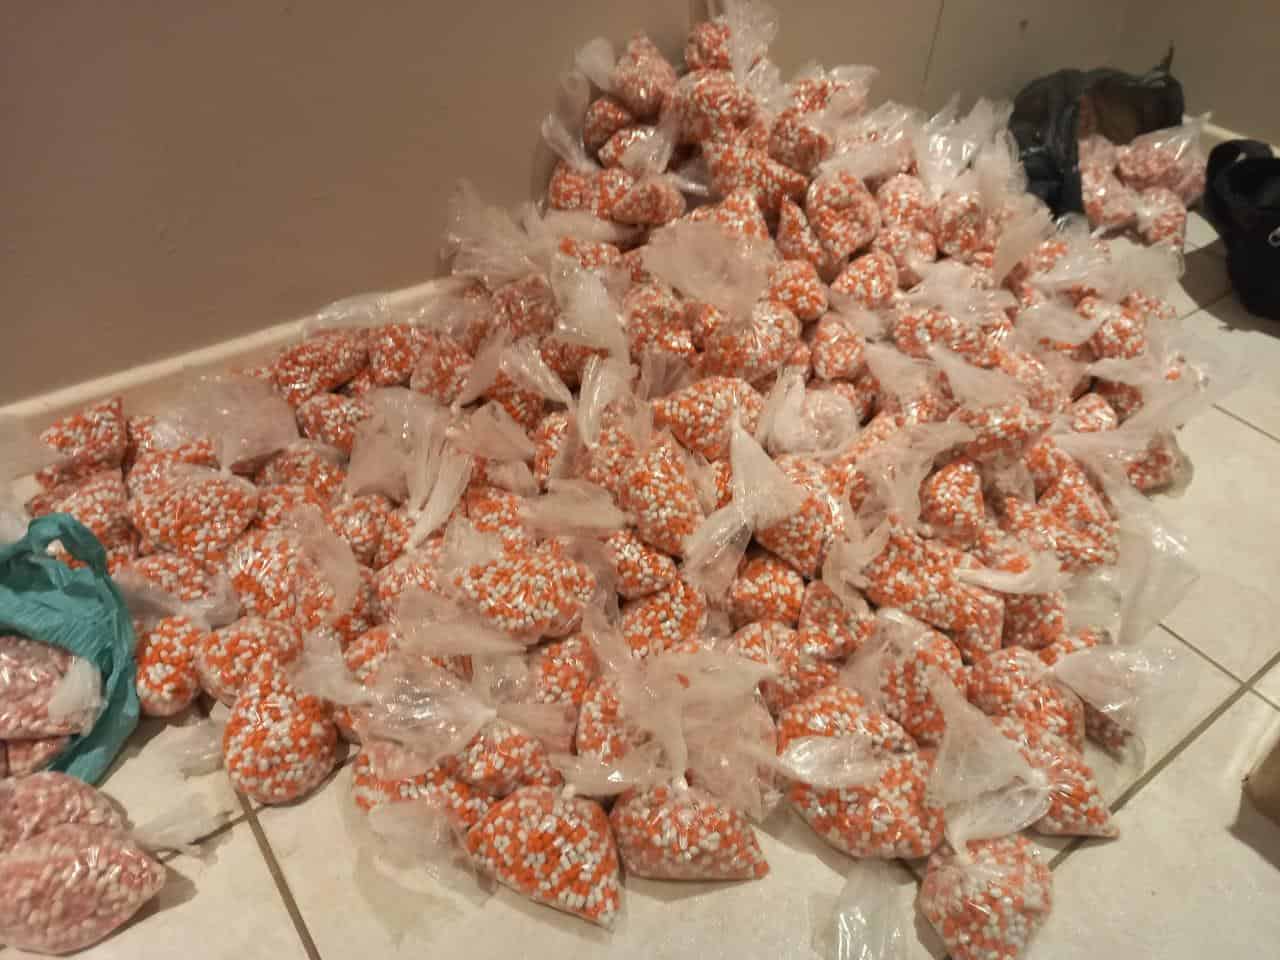 More than R154 million worth of drugs seized in Durban